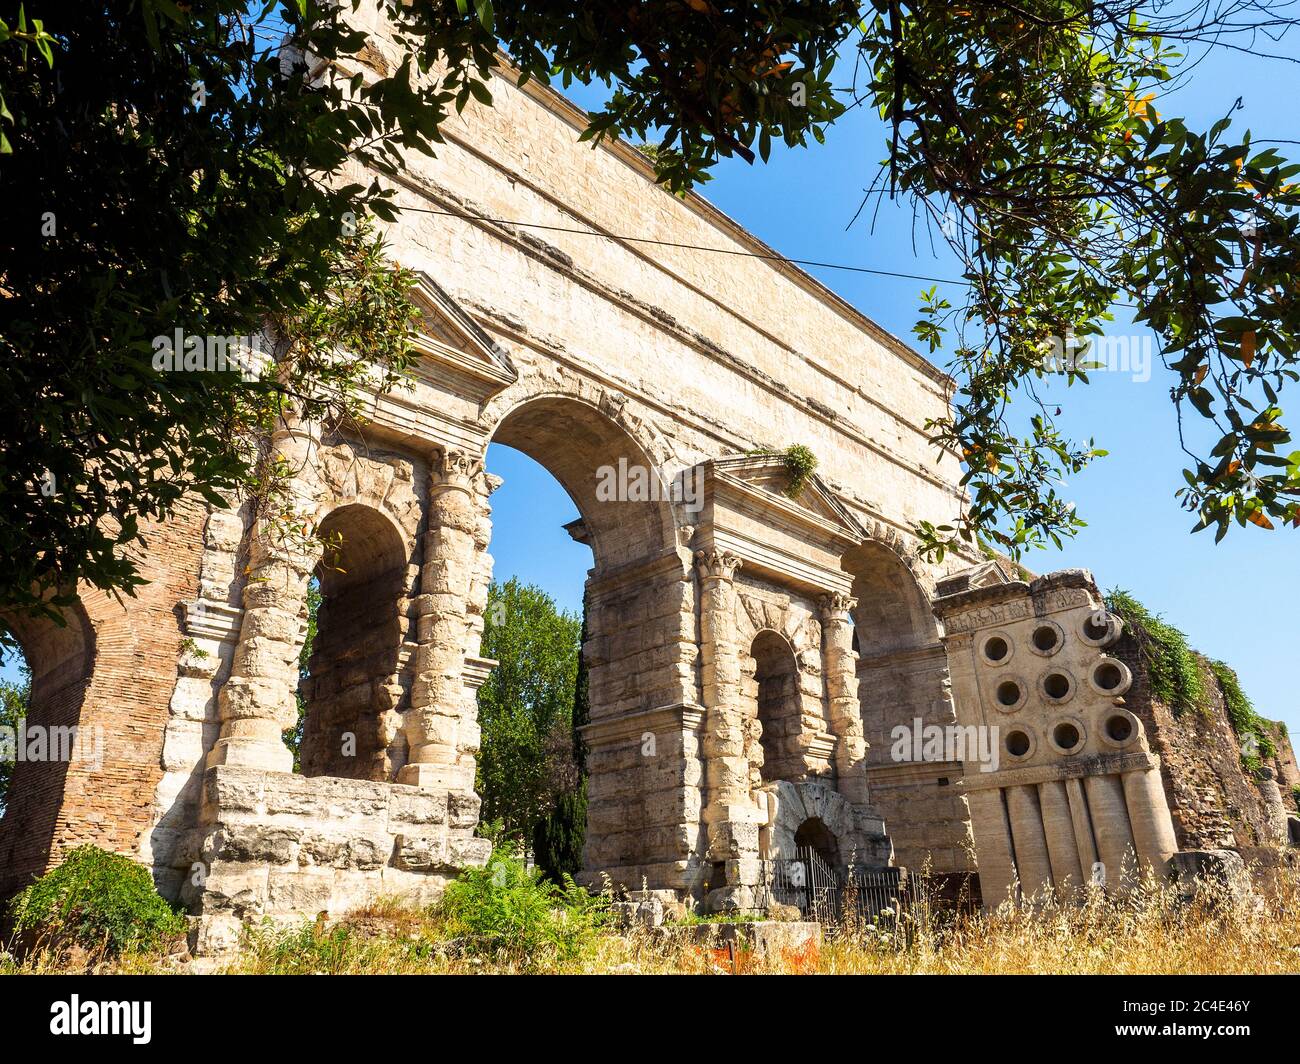 Porta Maggiore gate in the Aurelian Wall of Rome and the tomb of Marcus Vergilius Eurysaces the baker - Rome, Italy Stock Photo